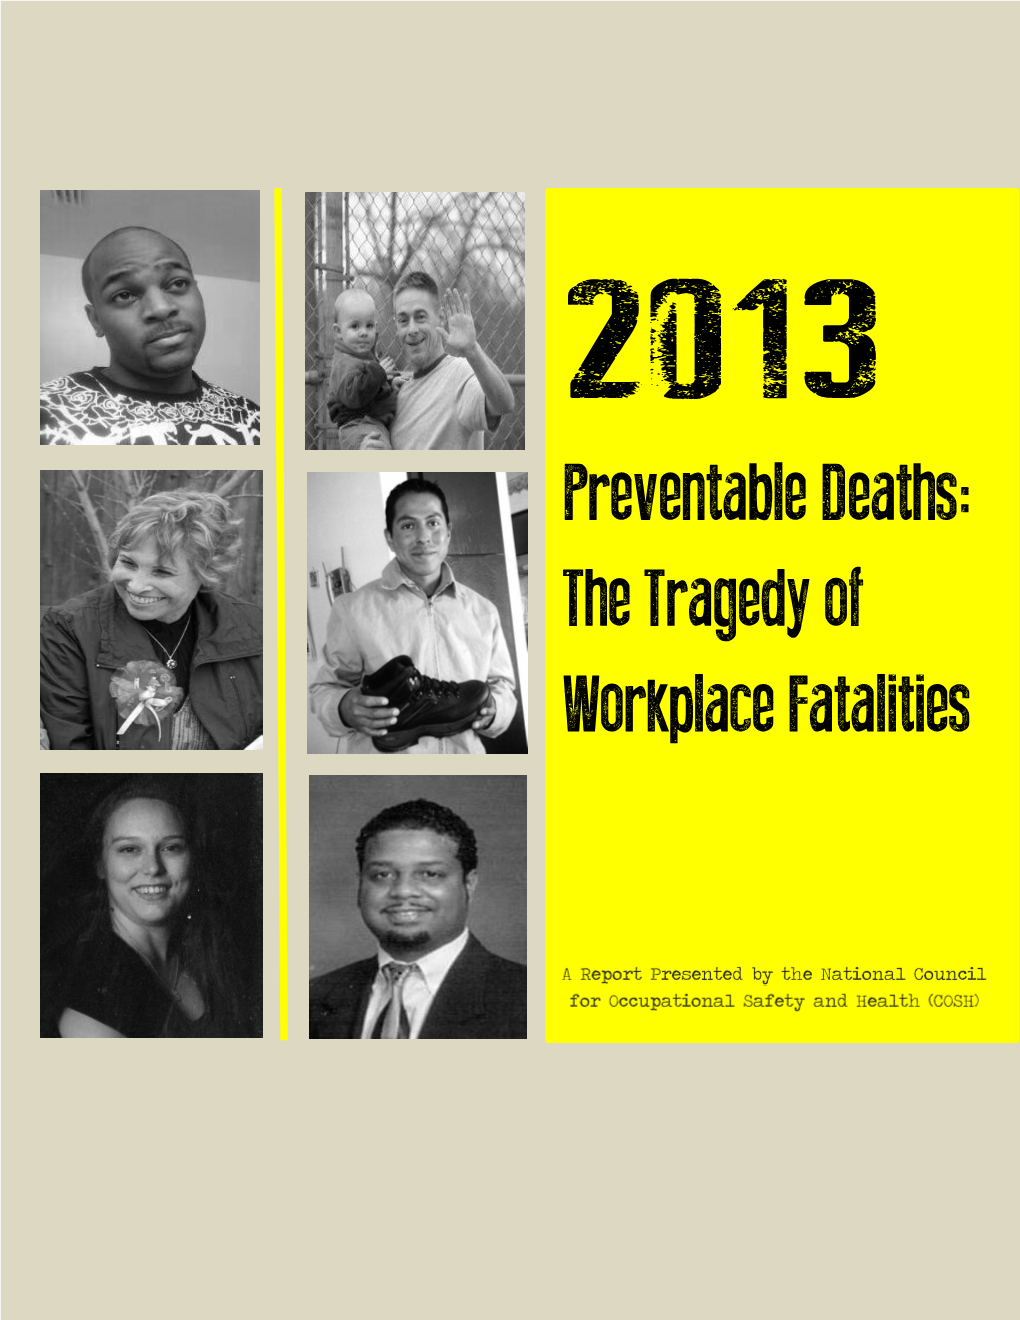 Preventable Deaths: the Tragedy of Workplace Fatalities